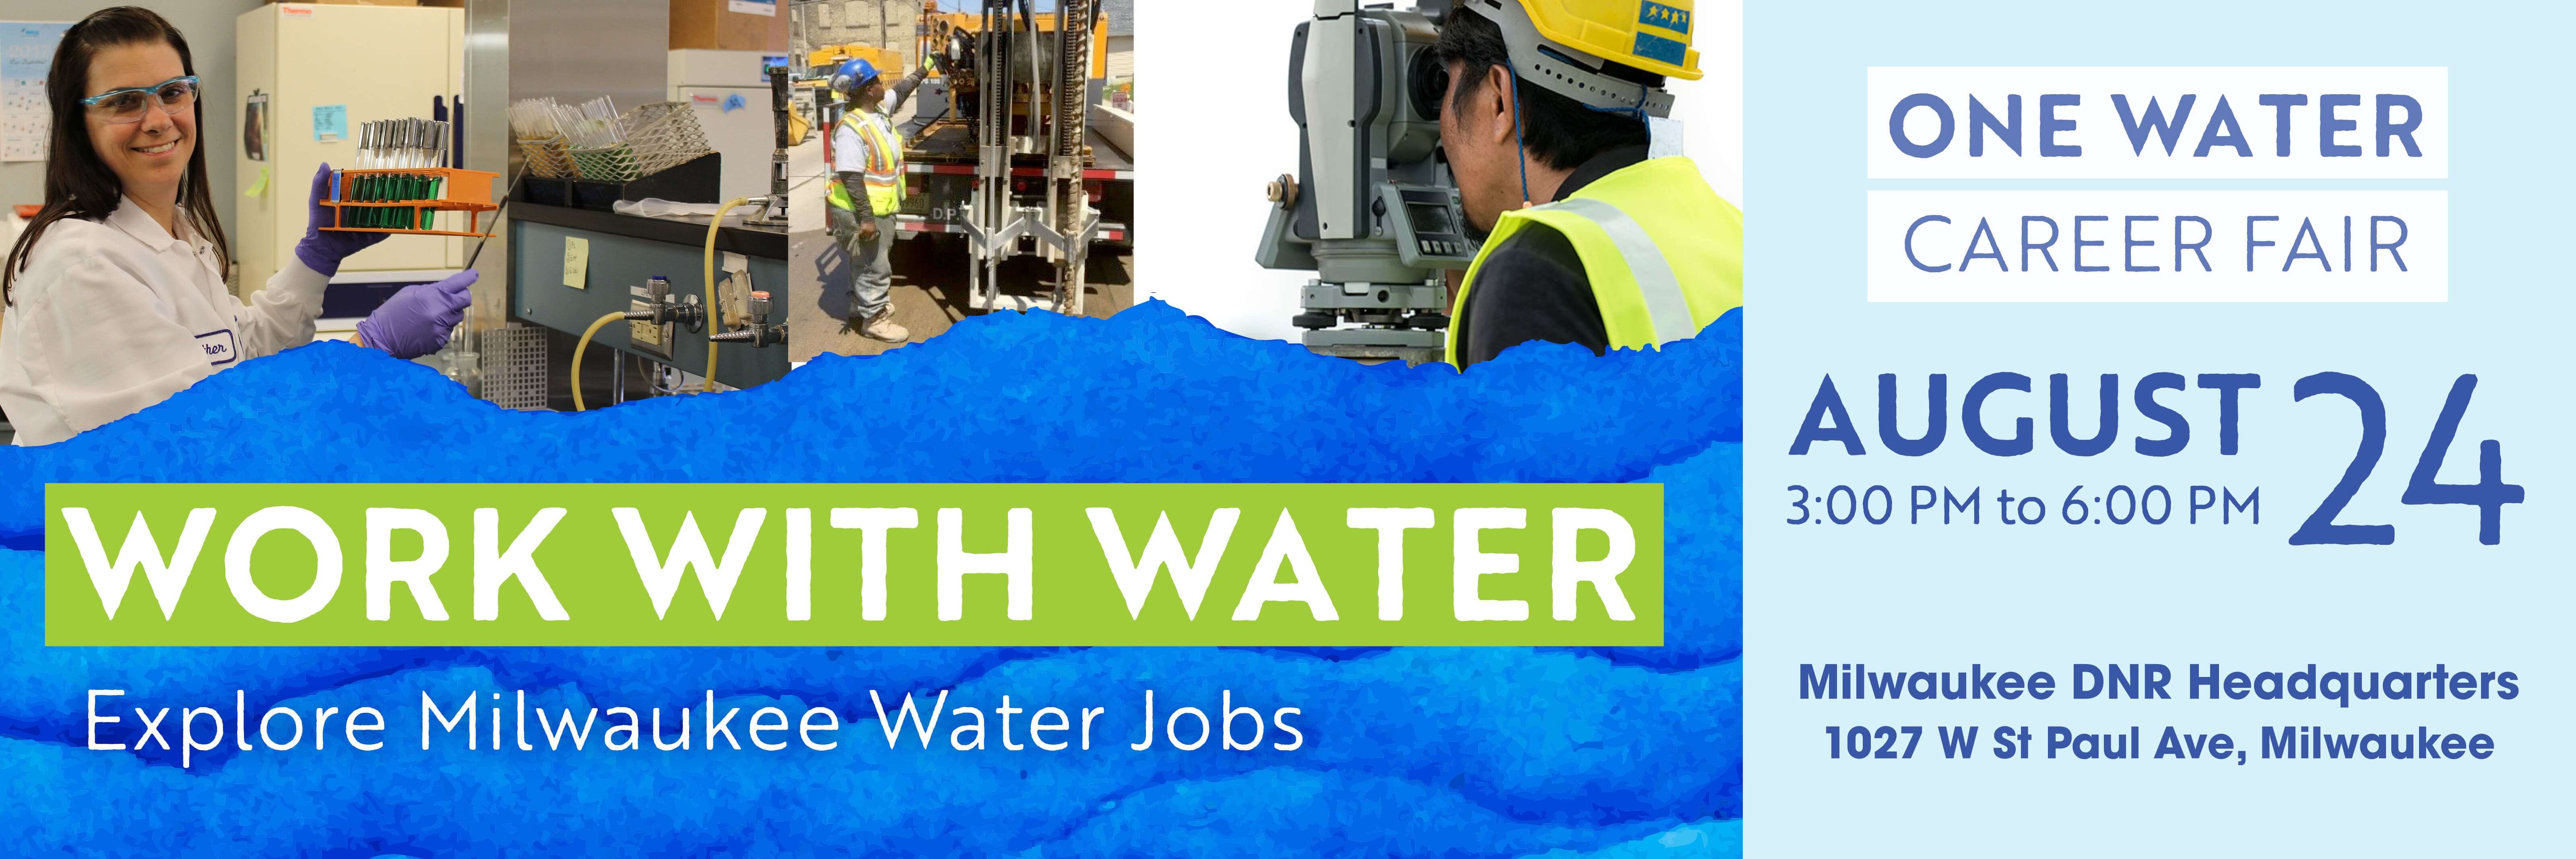 one water our water career fair graphic